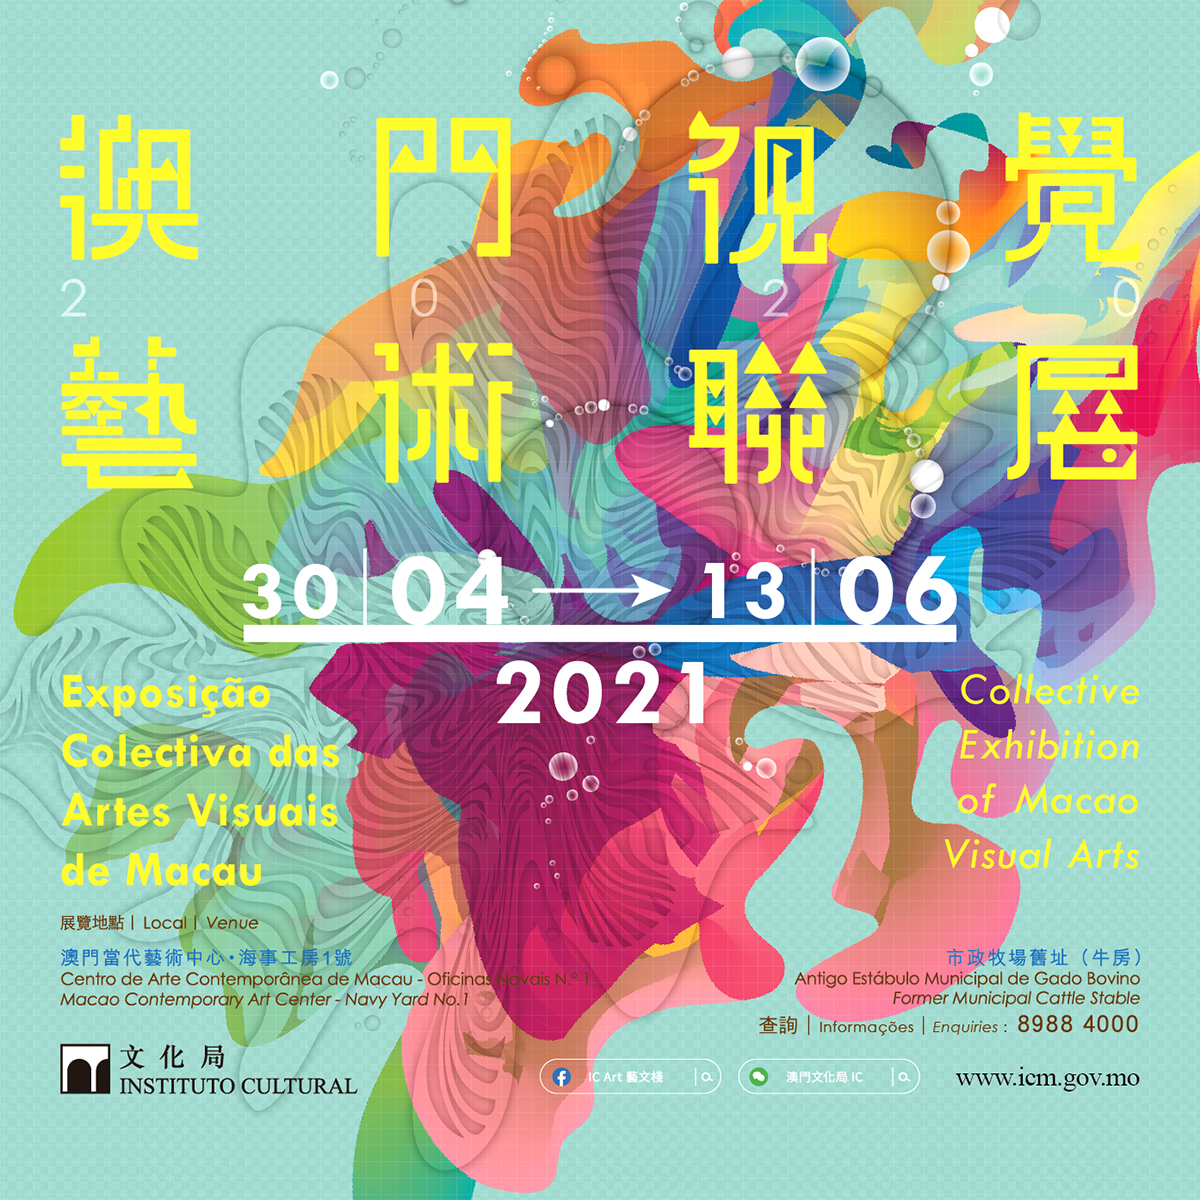 Collective Exhibition of Macao Visual Arts 2021 Poster